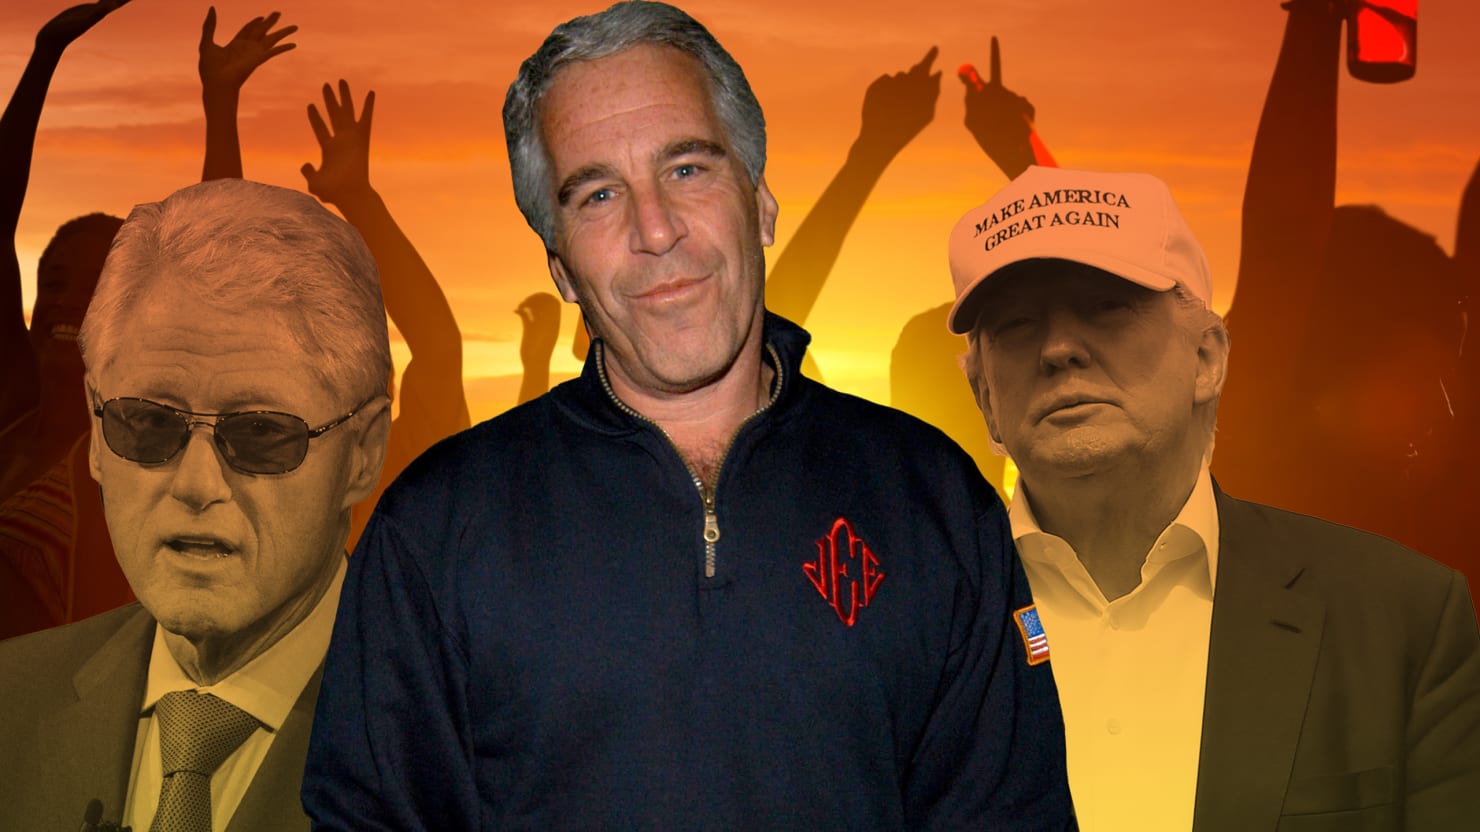 The Billionaire Pedophile Who Could Bring Down Donald Trump and Hillary